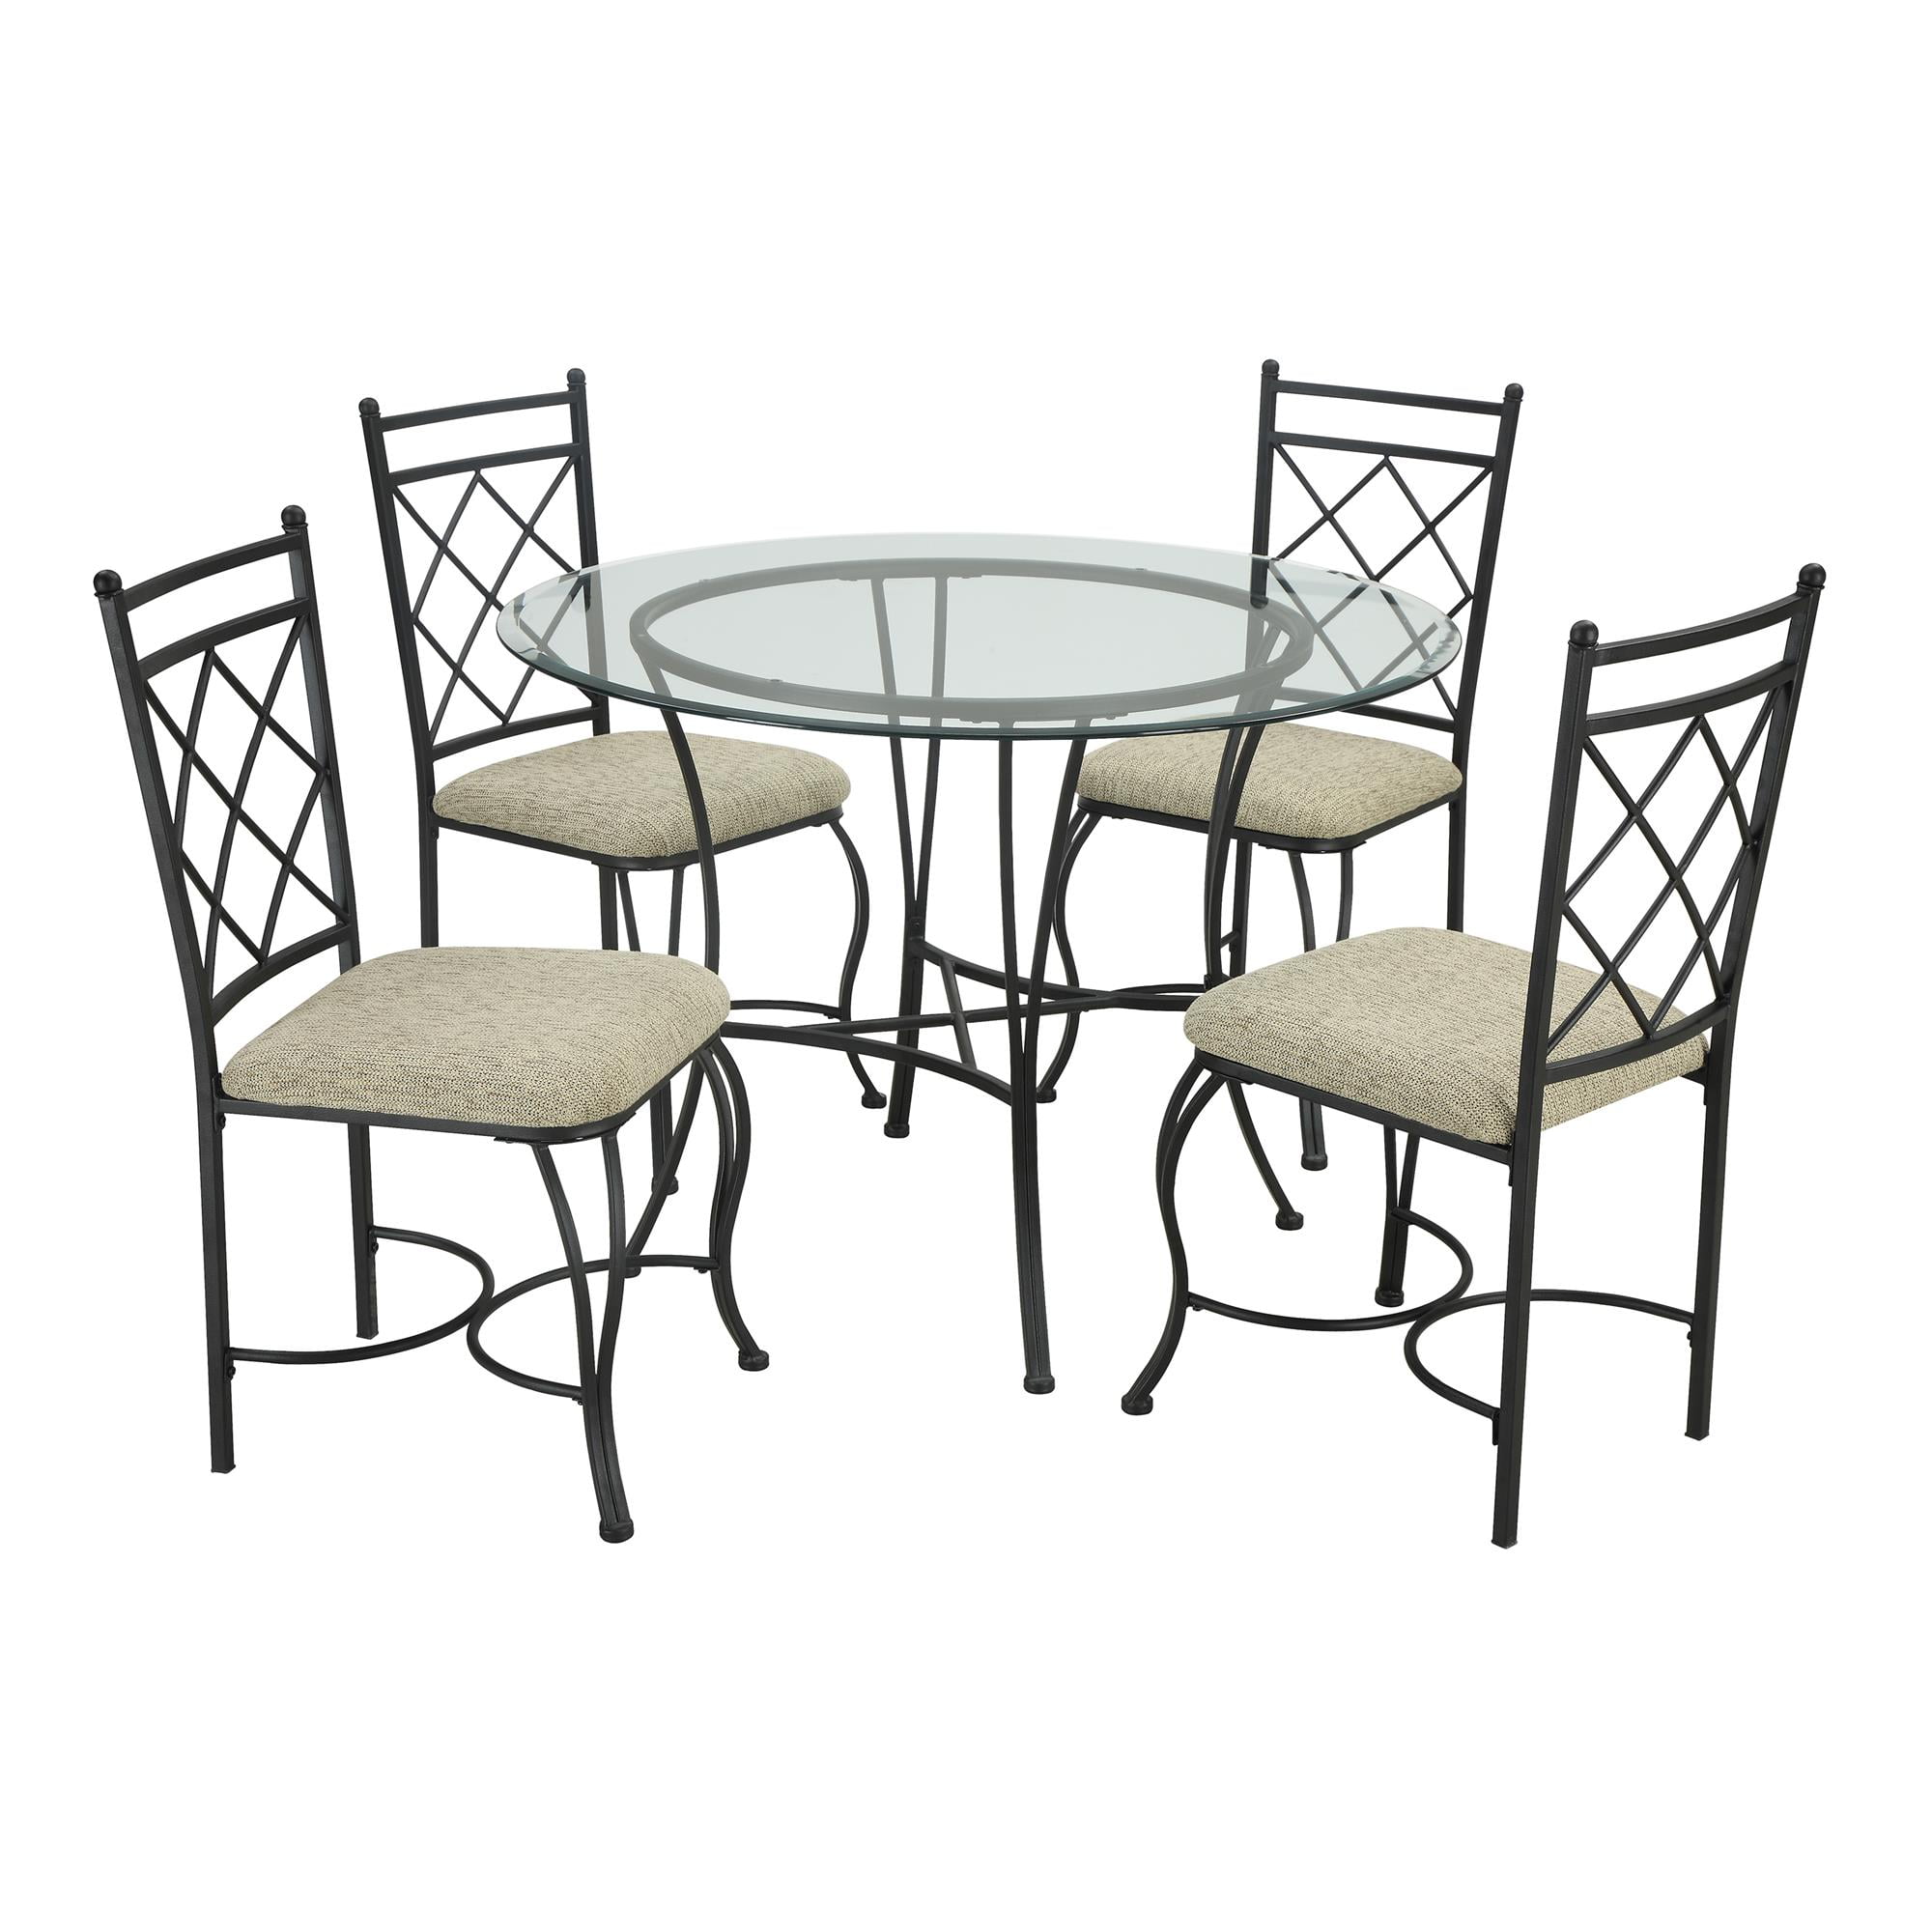 Mainstays 5-piece Glass Top Metal Dining Set W Table and Chairs Seats 4 Compact for sale online